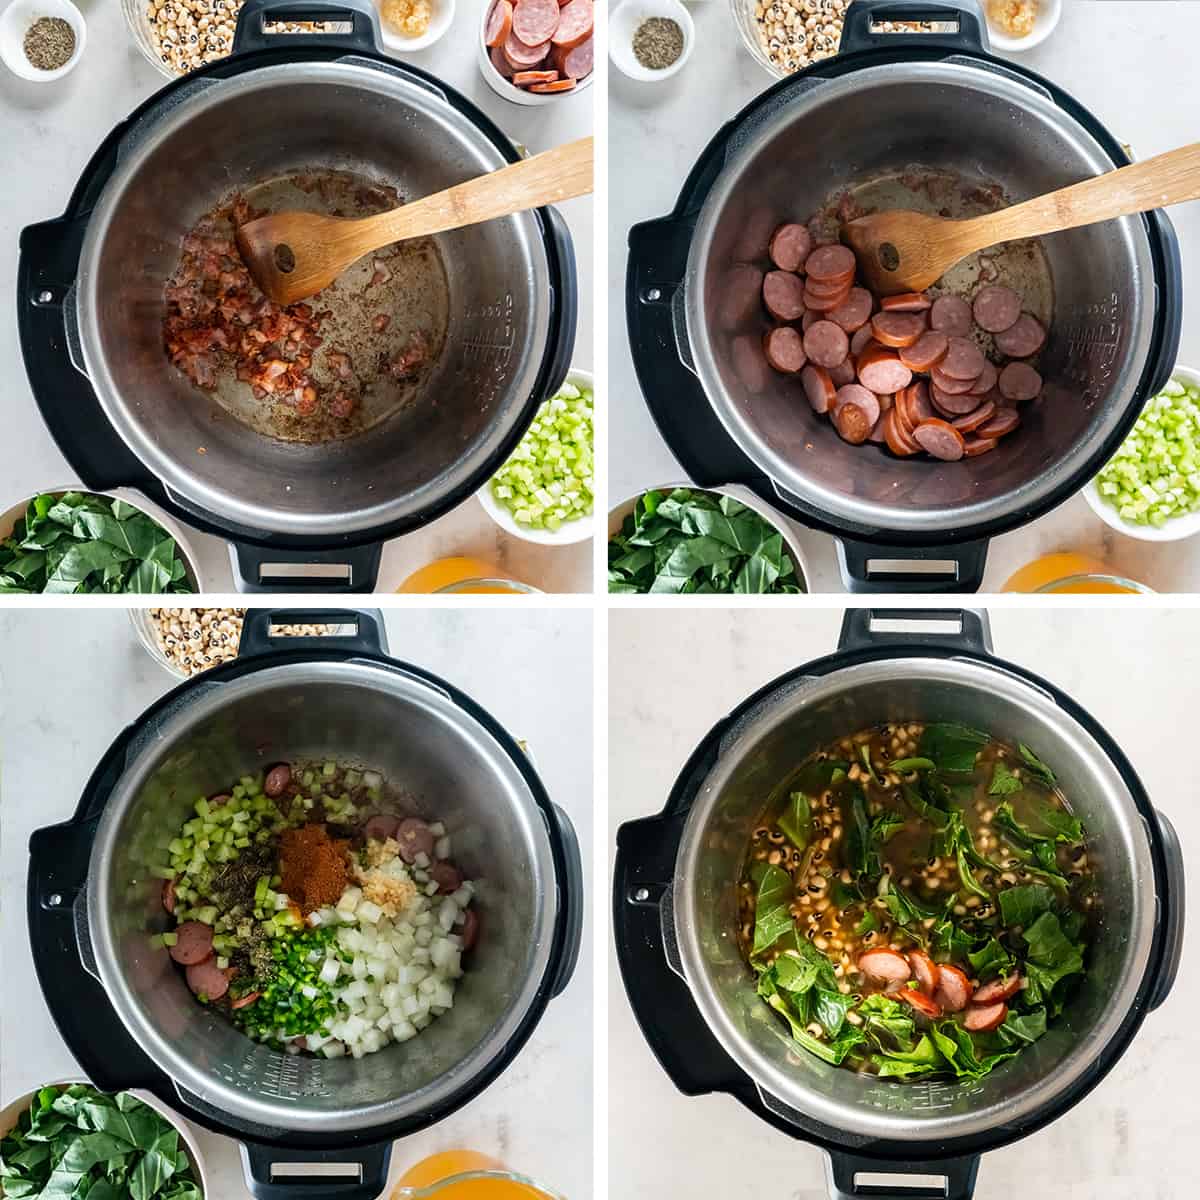 Black-eyed peas, sausage, and other ingredients being cooked in an Instant Pot.